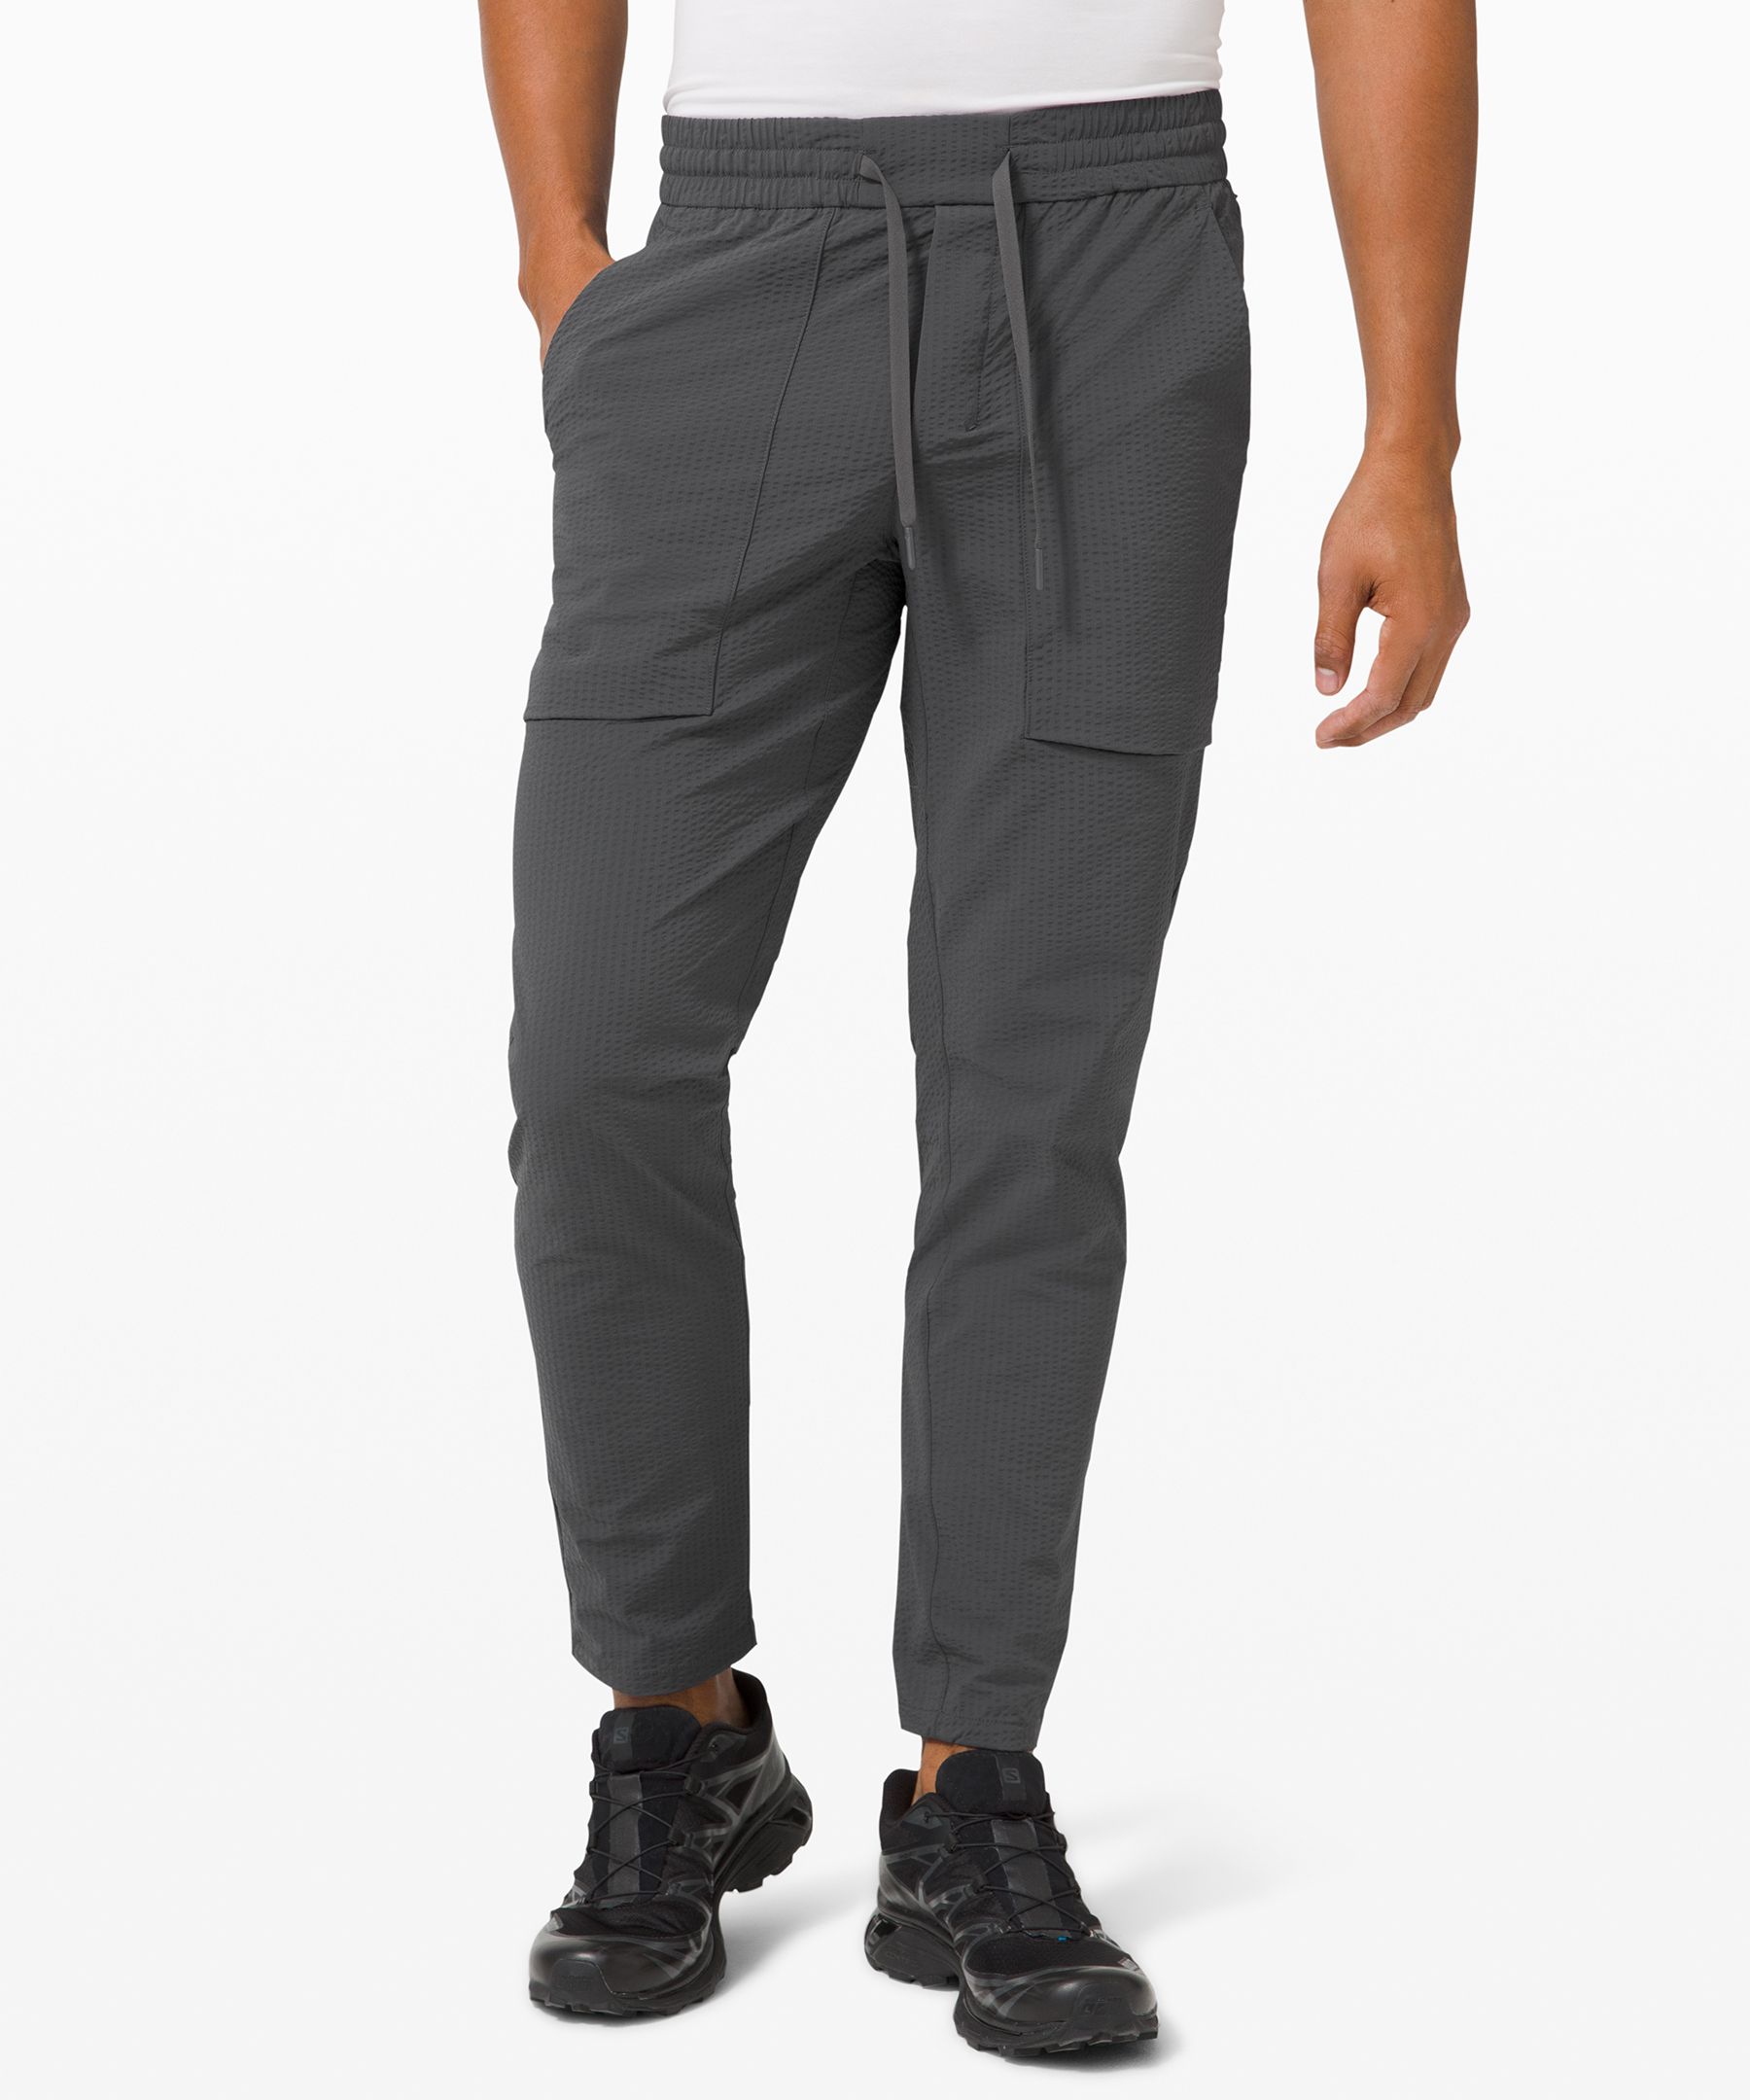 Lululemon Bowline Pants and Shorts Review 2021